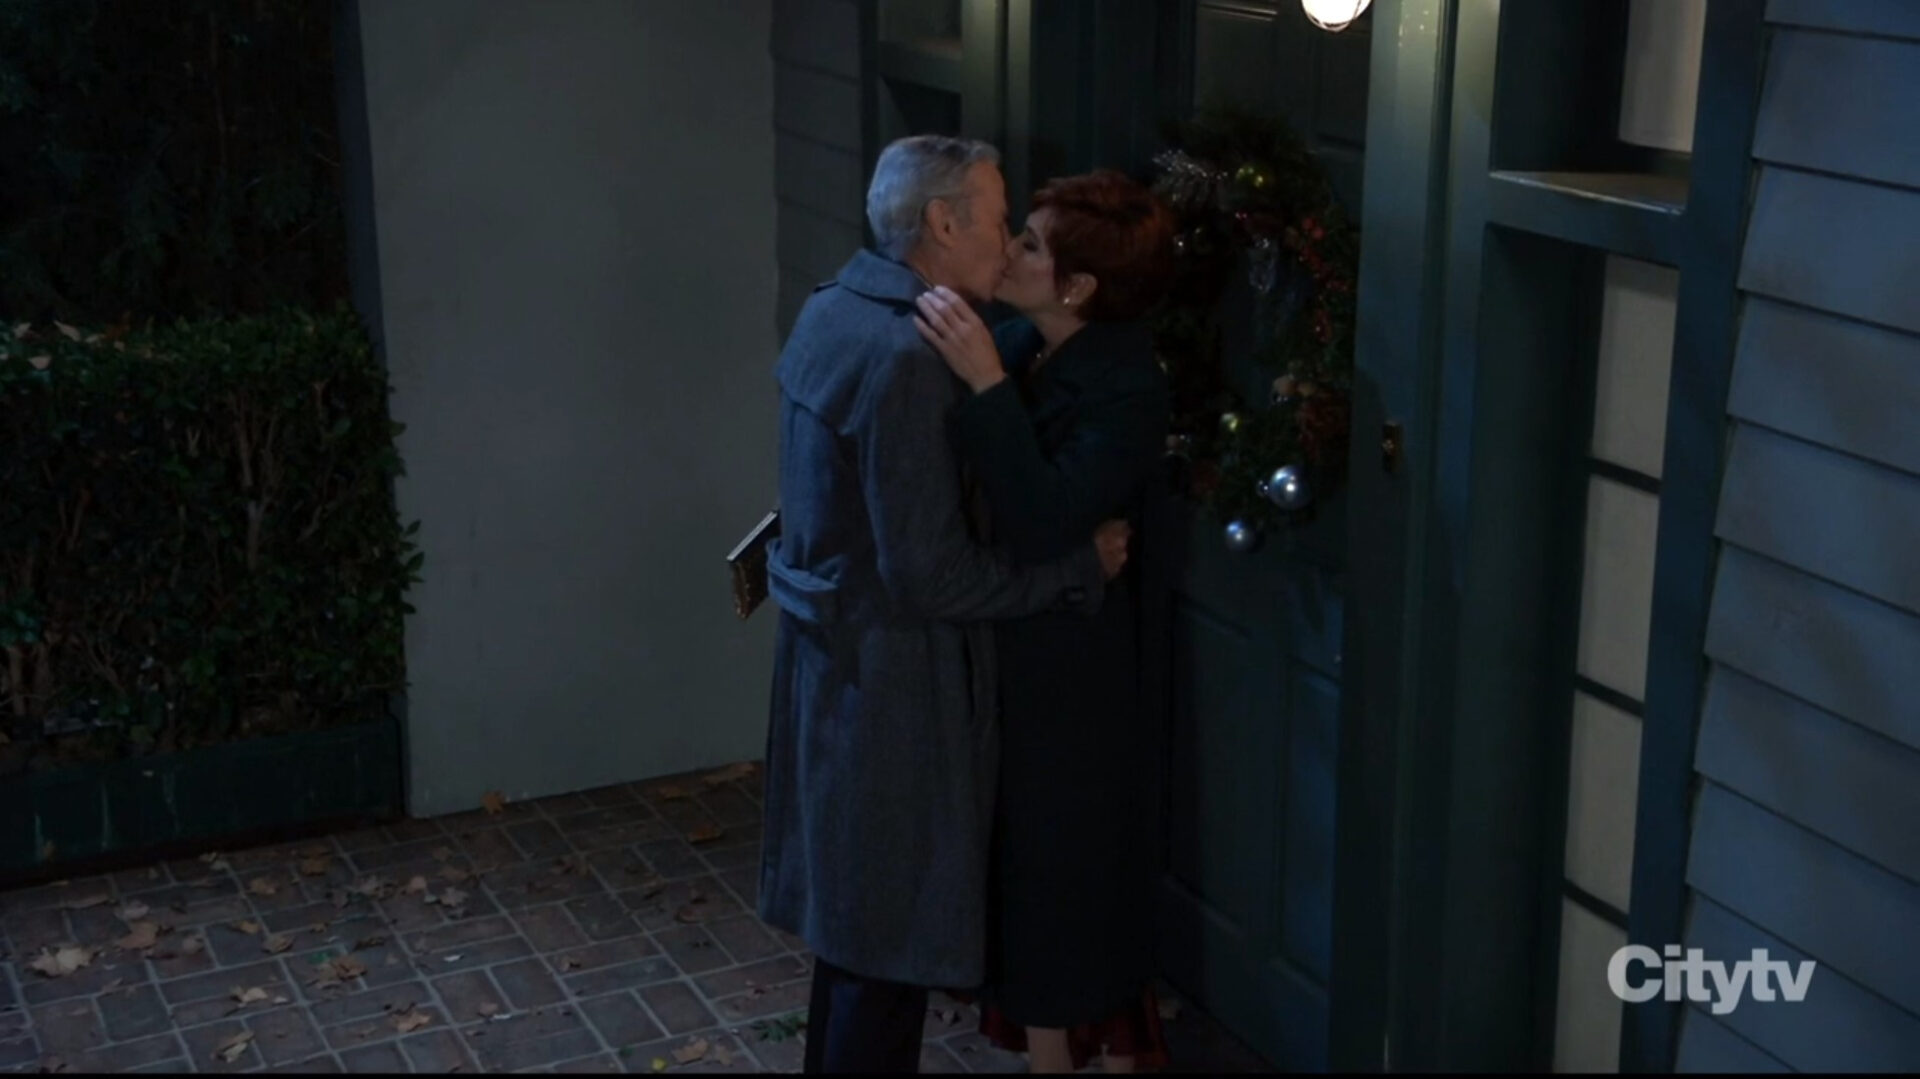 robert and diane kissing outside